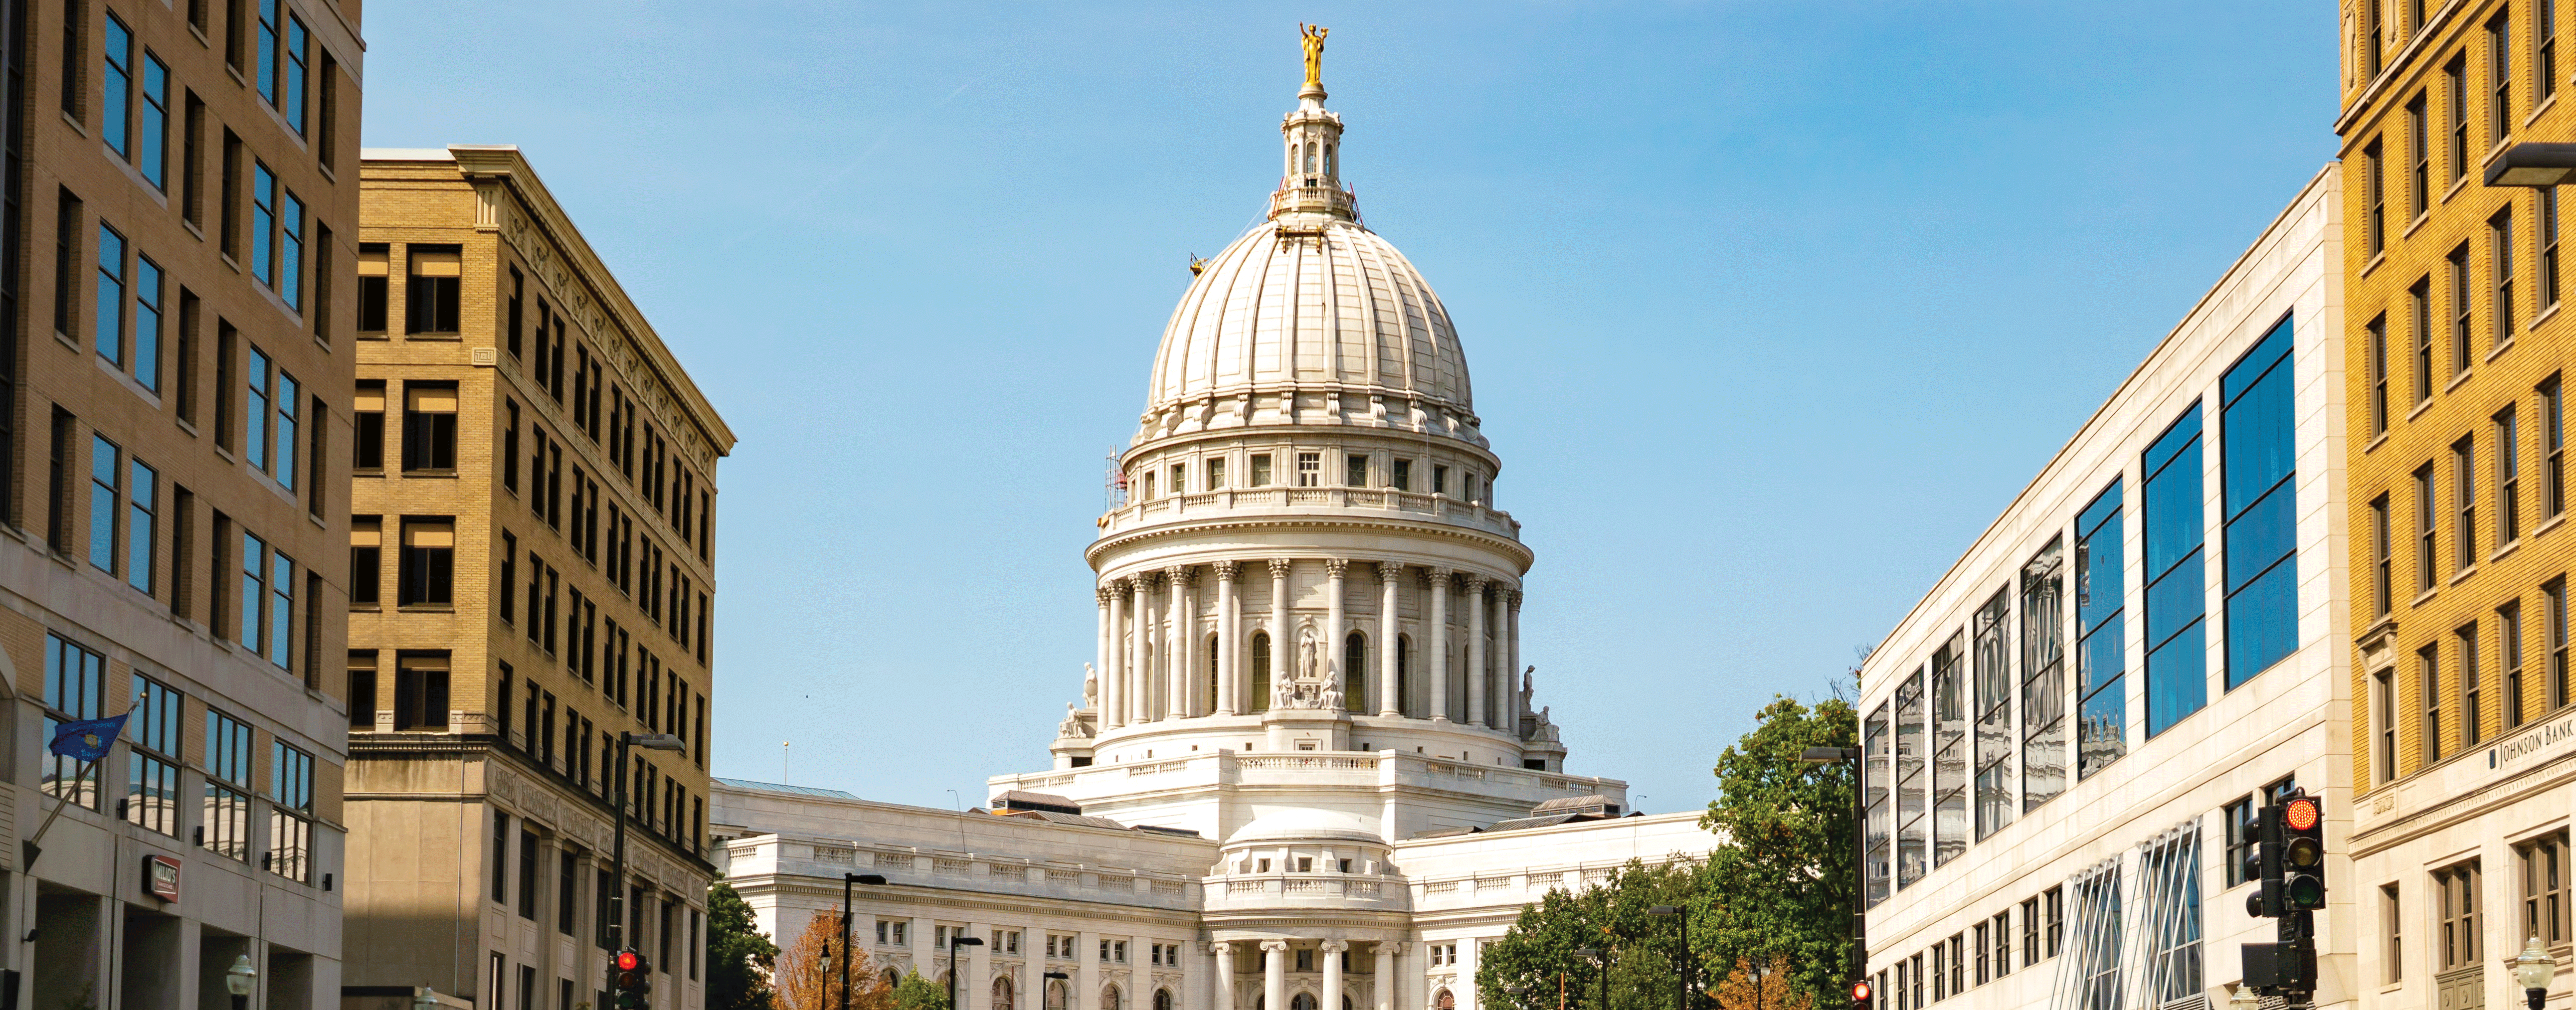 Photograph of the Wisconsin State capital building in Madison.